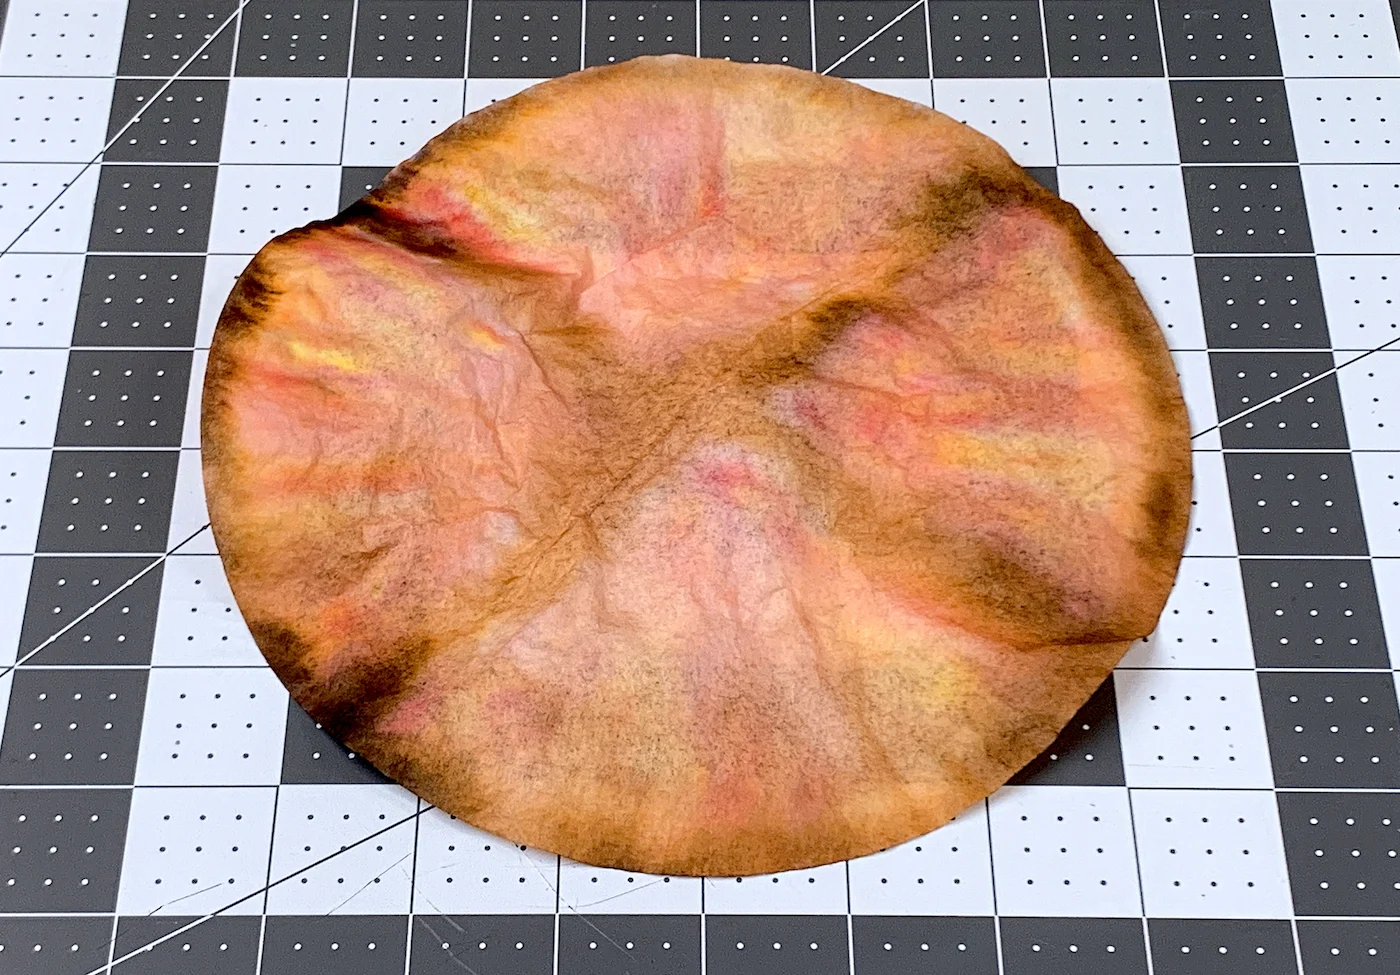 Dried coffee filter dyed with markers